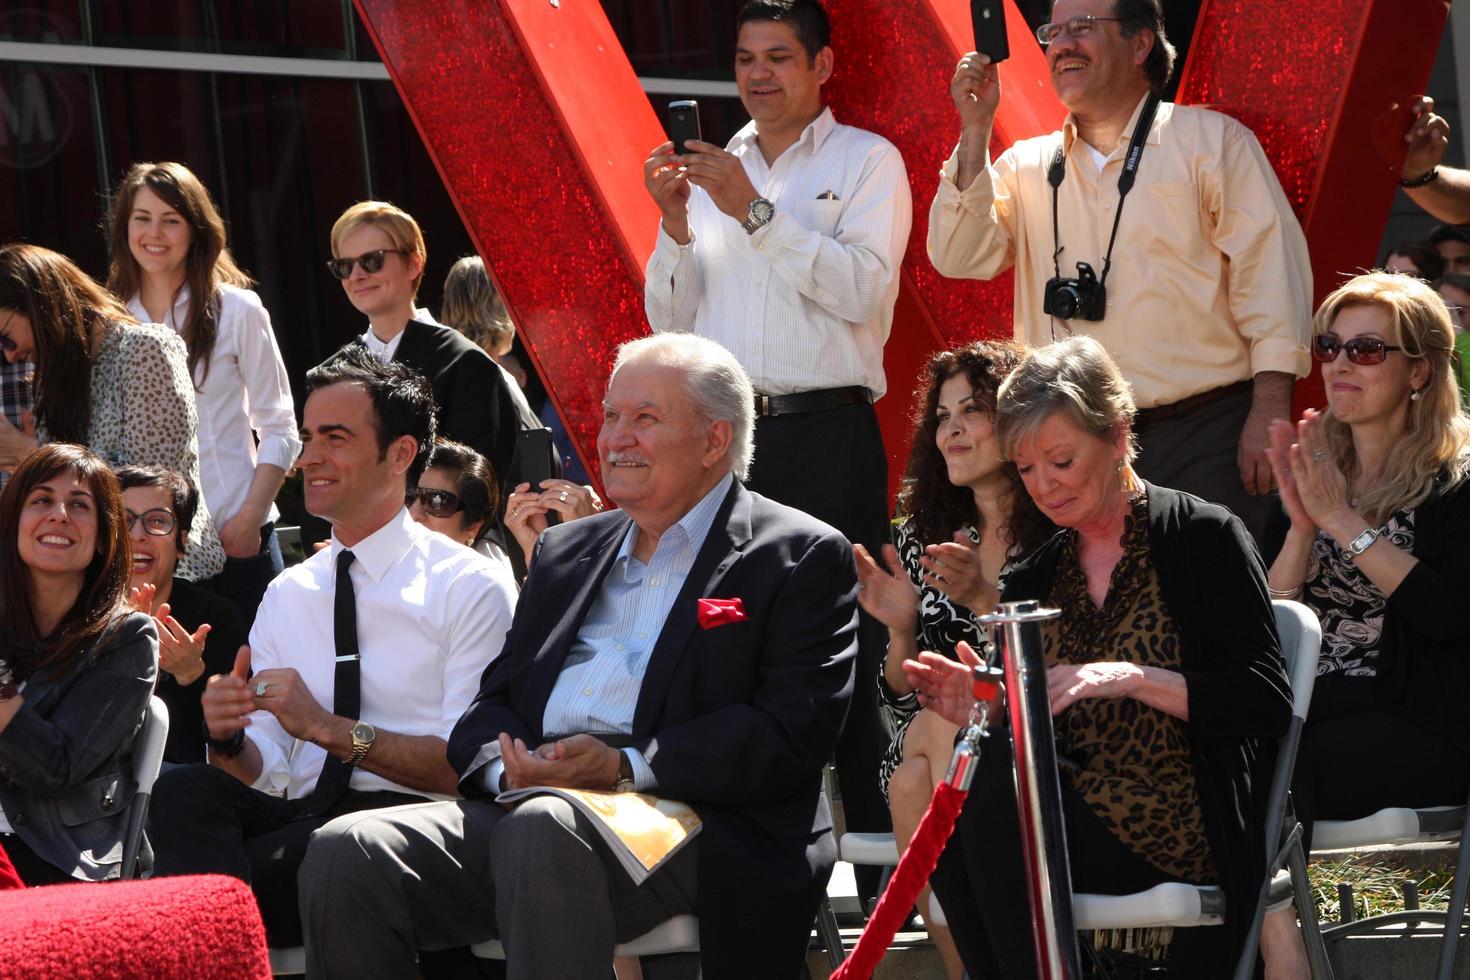 LOS ANGELES, FEB 22 -  Justin Theroux, John Aniston at the Jennifer Aniston Hollywood Walk of Fame Star Ceremony at the W Hollywood on February 22, 2012 in Los Angeles, CA photo